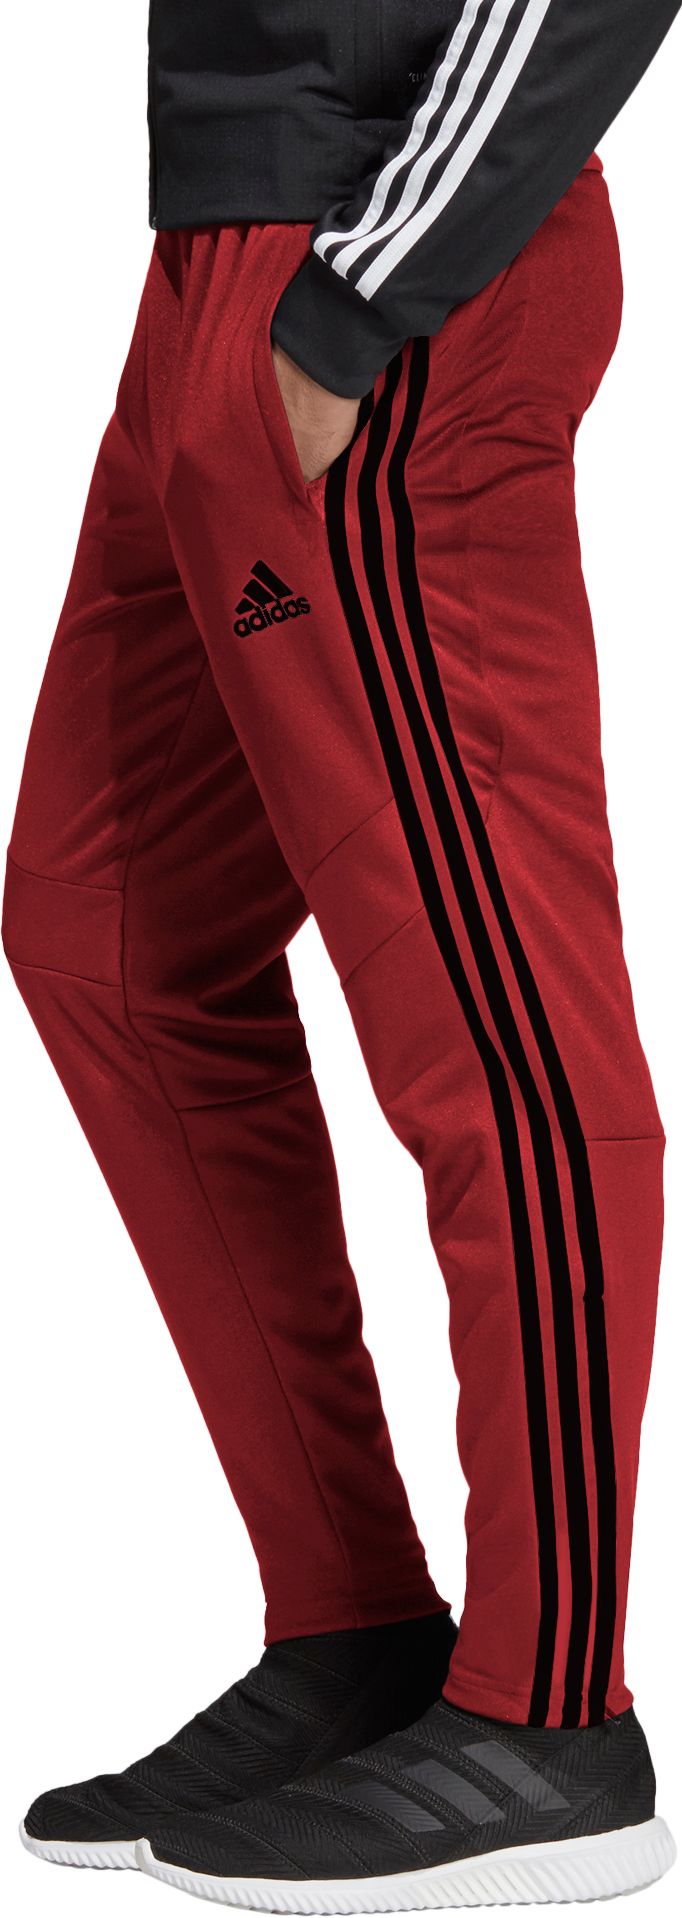 Red Adidas Track Pants Outfit